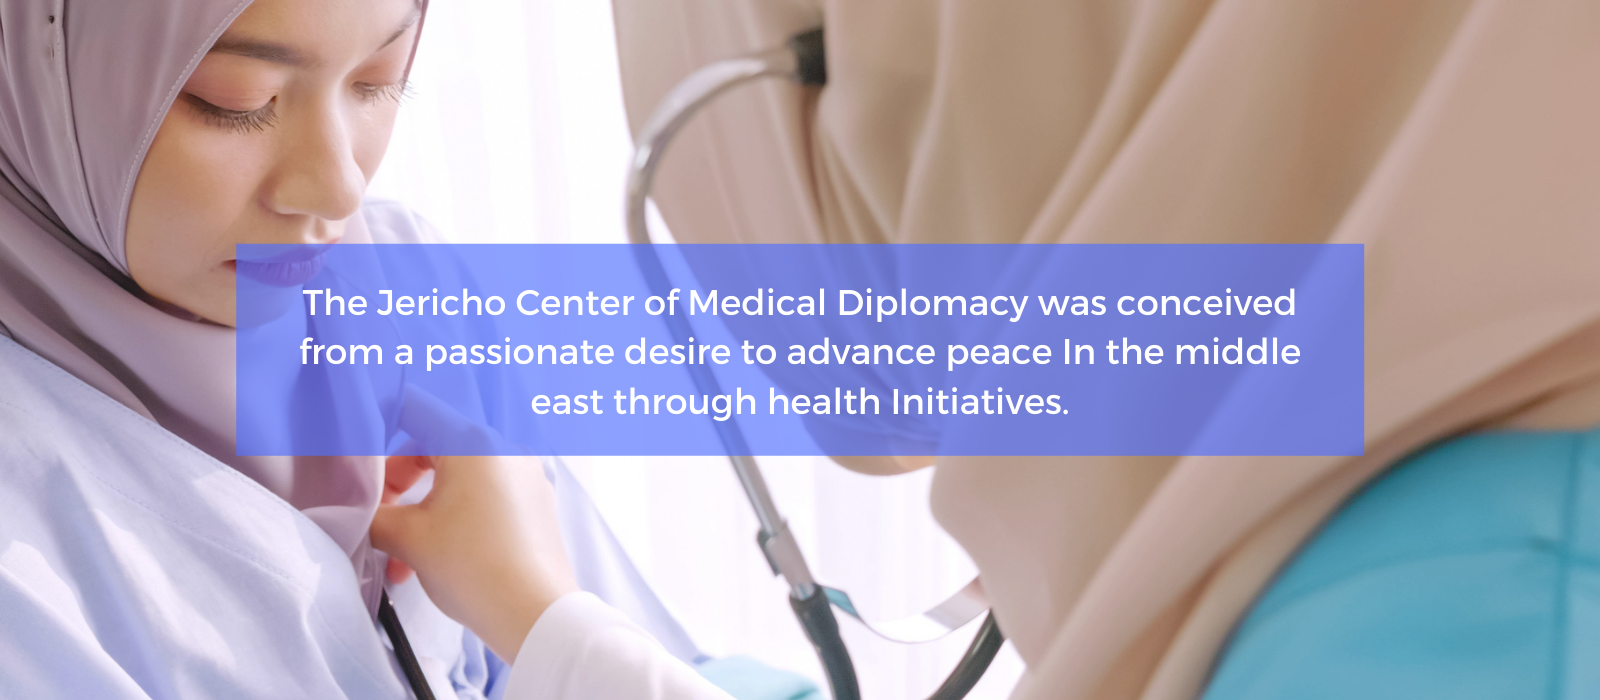 The Jericho Center of Medical Diplomacy Image 1